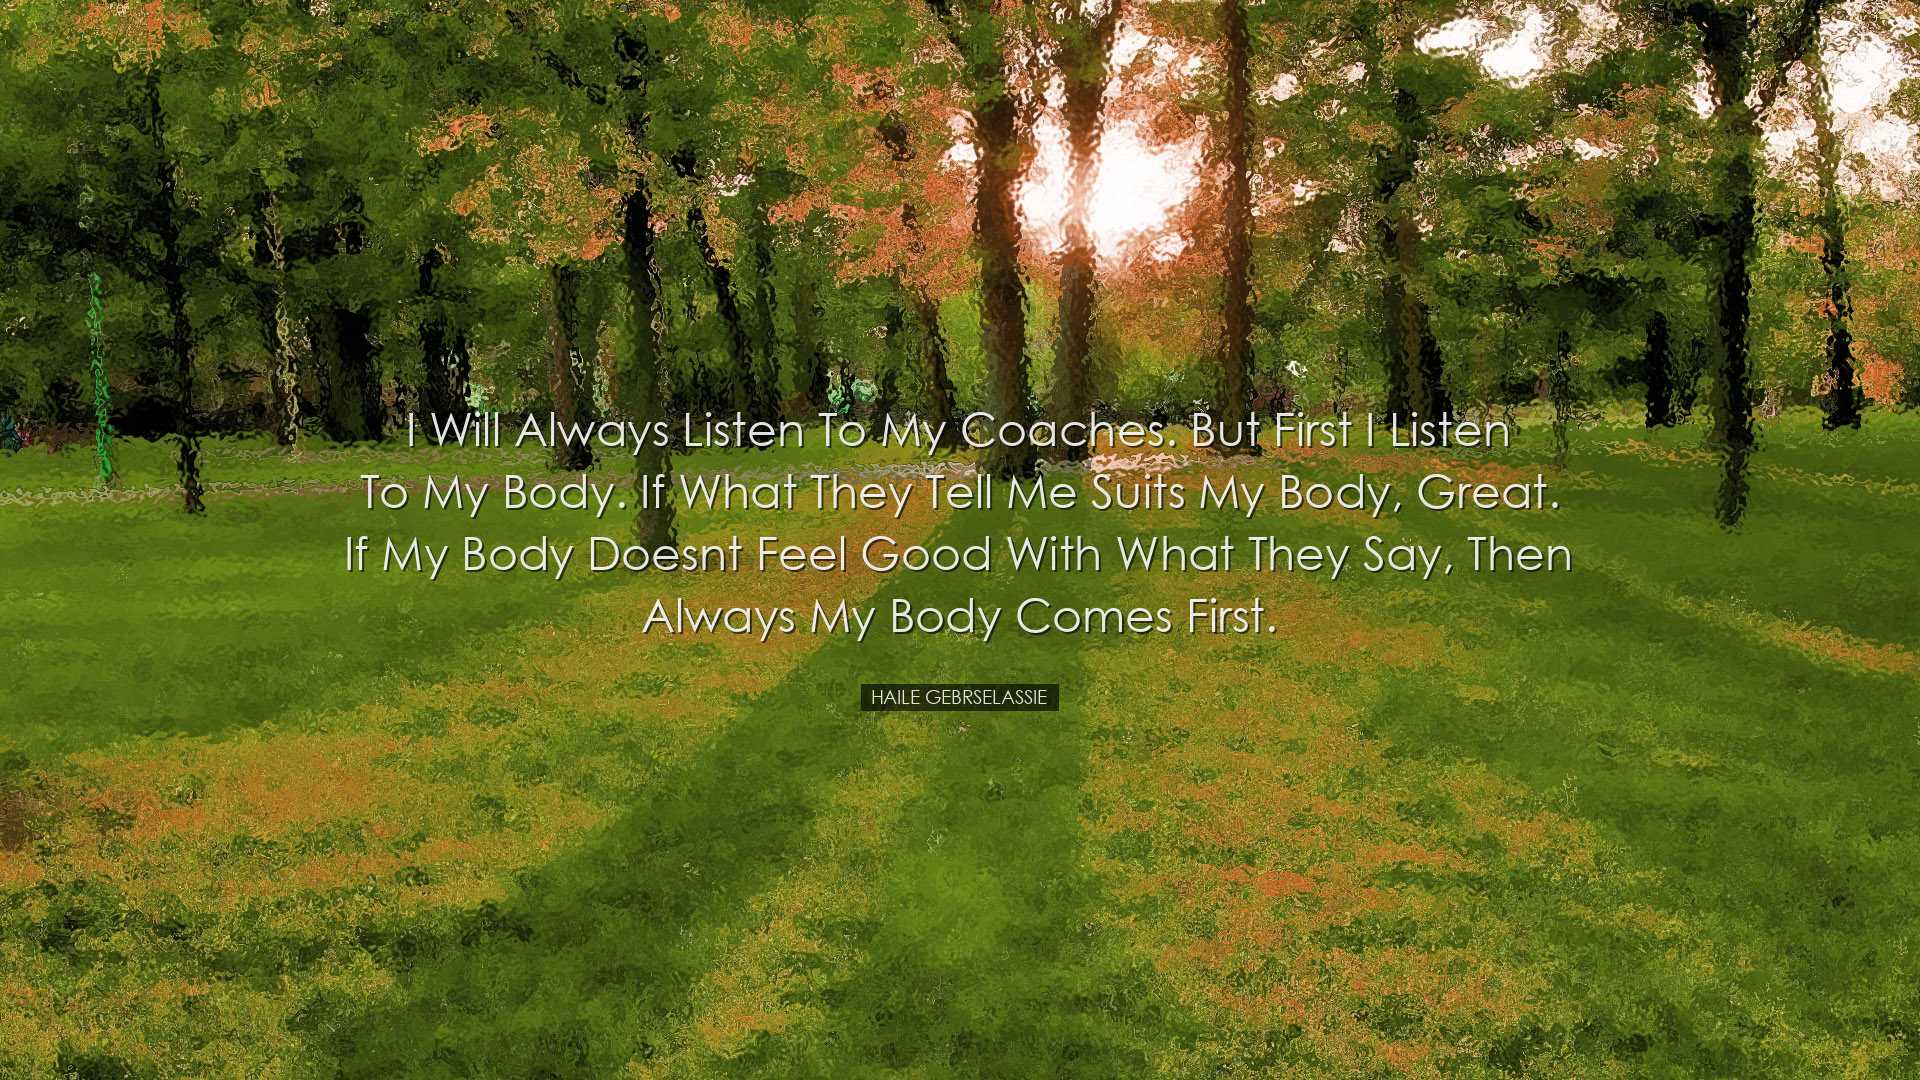 I will always listen to my coaches. But first I listen to my body.